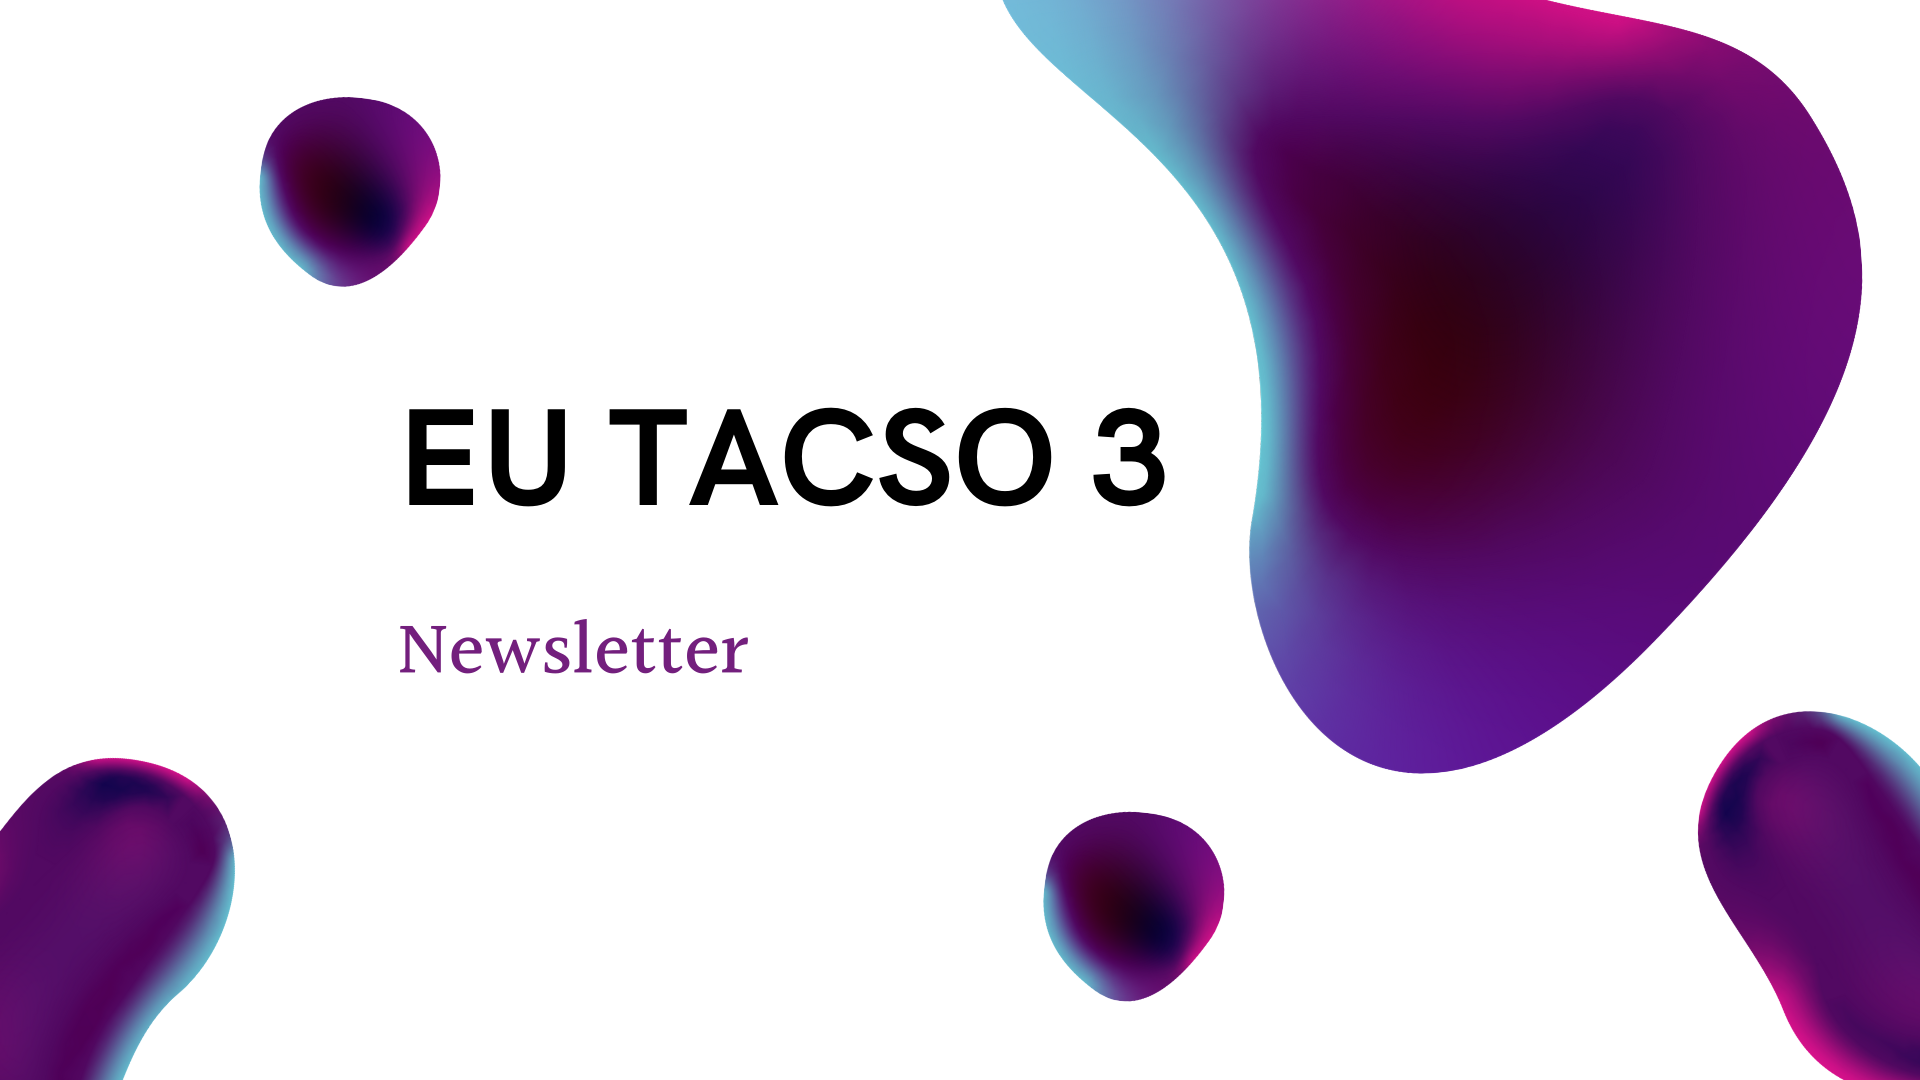 EU TACSO 3 Announces the Launch of its First Newsletter Issue